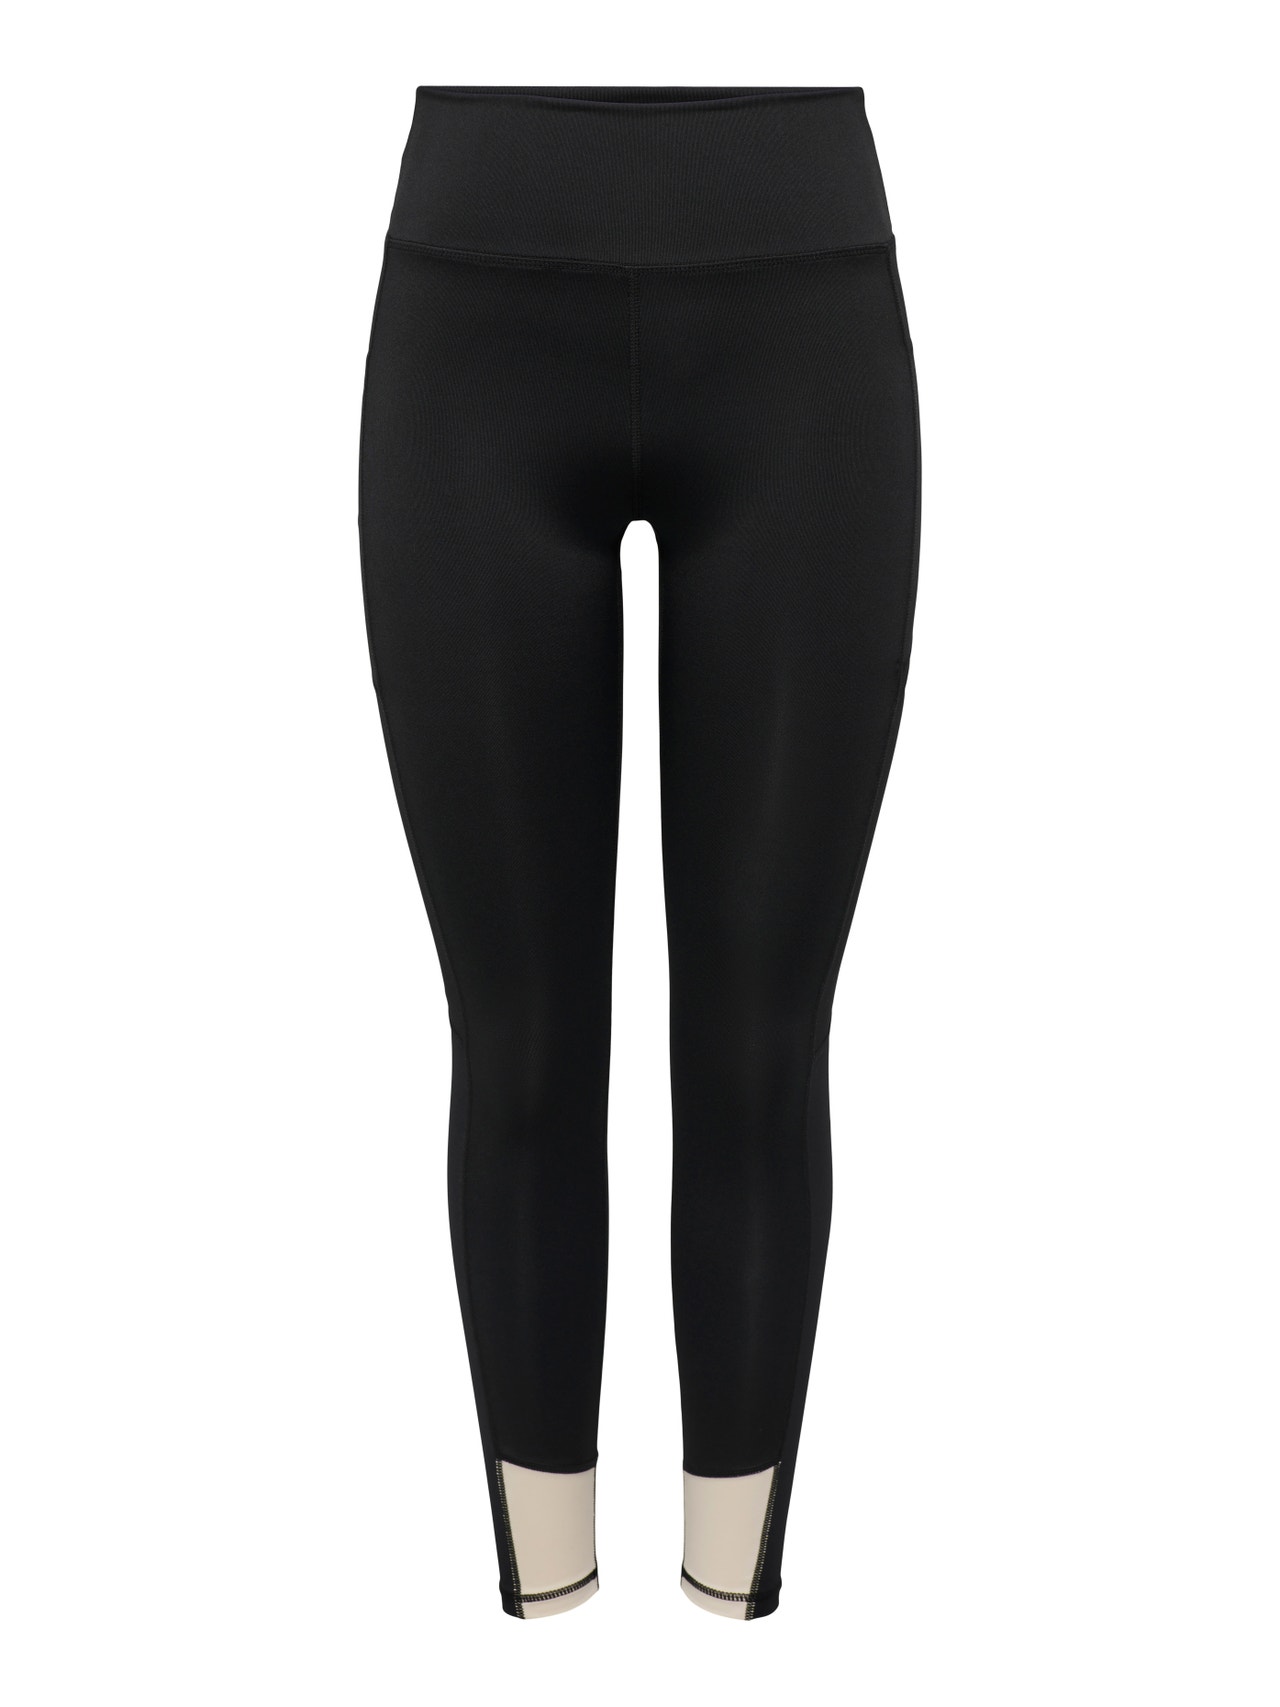 ONLY Tight fit High waist Legging -Black - 15305447